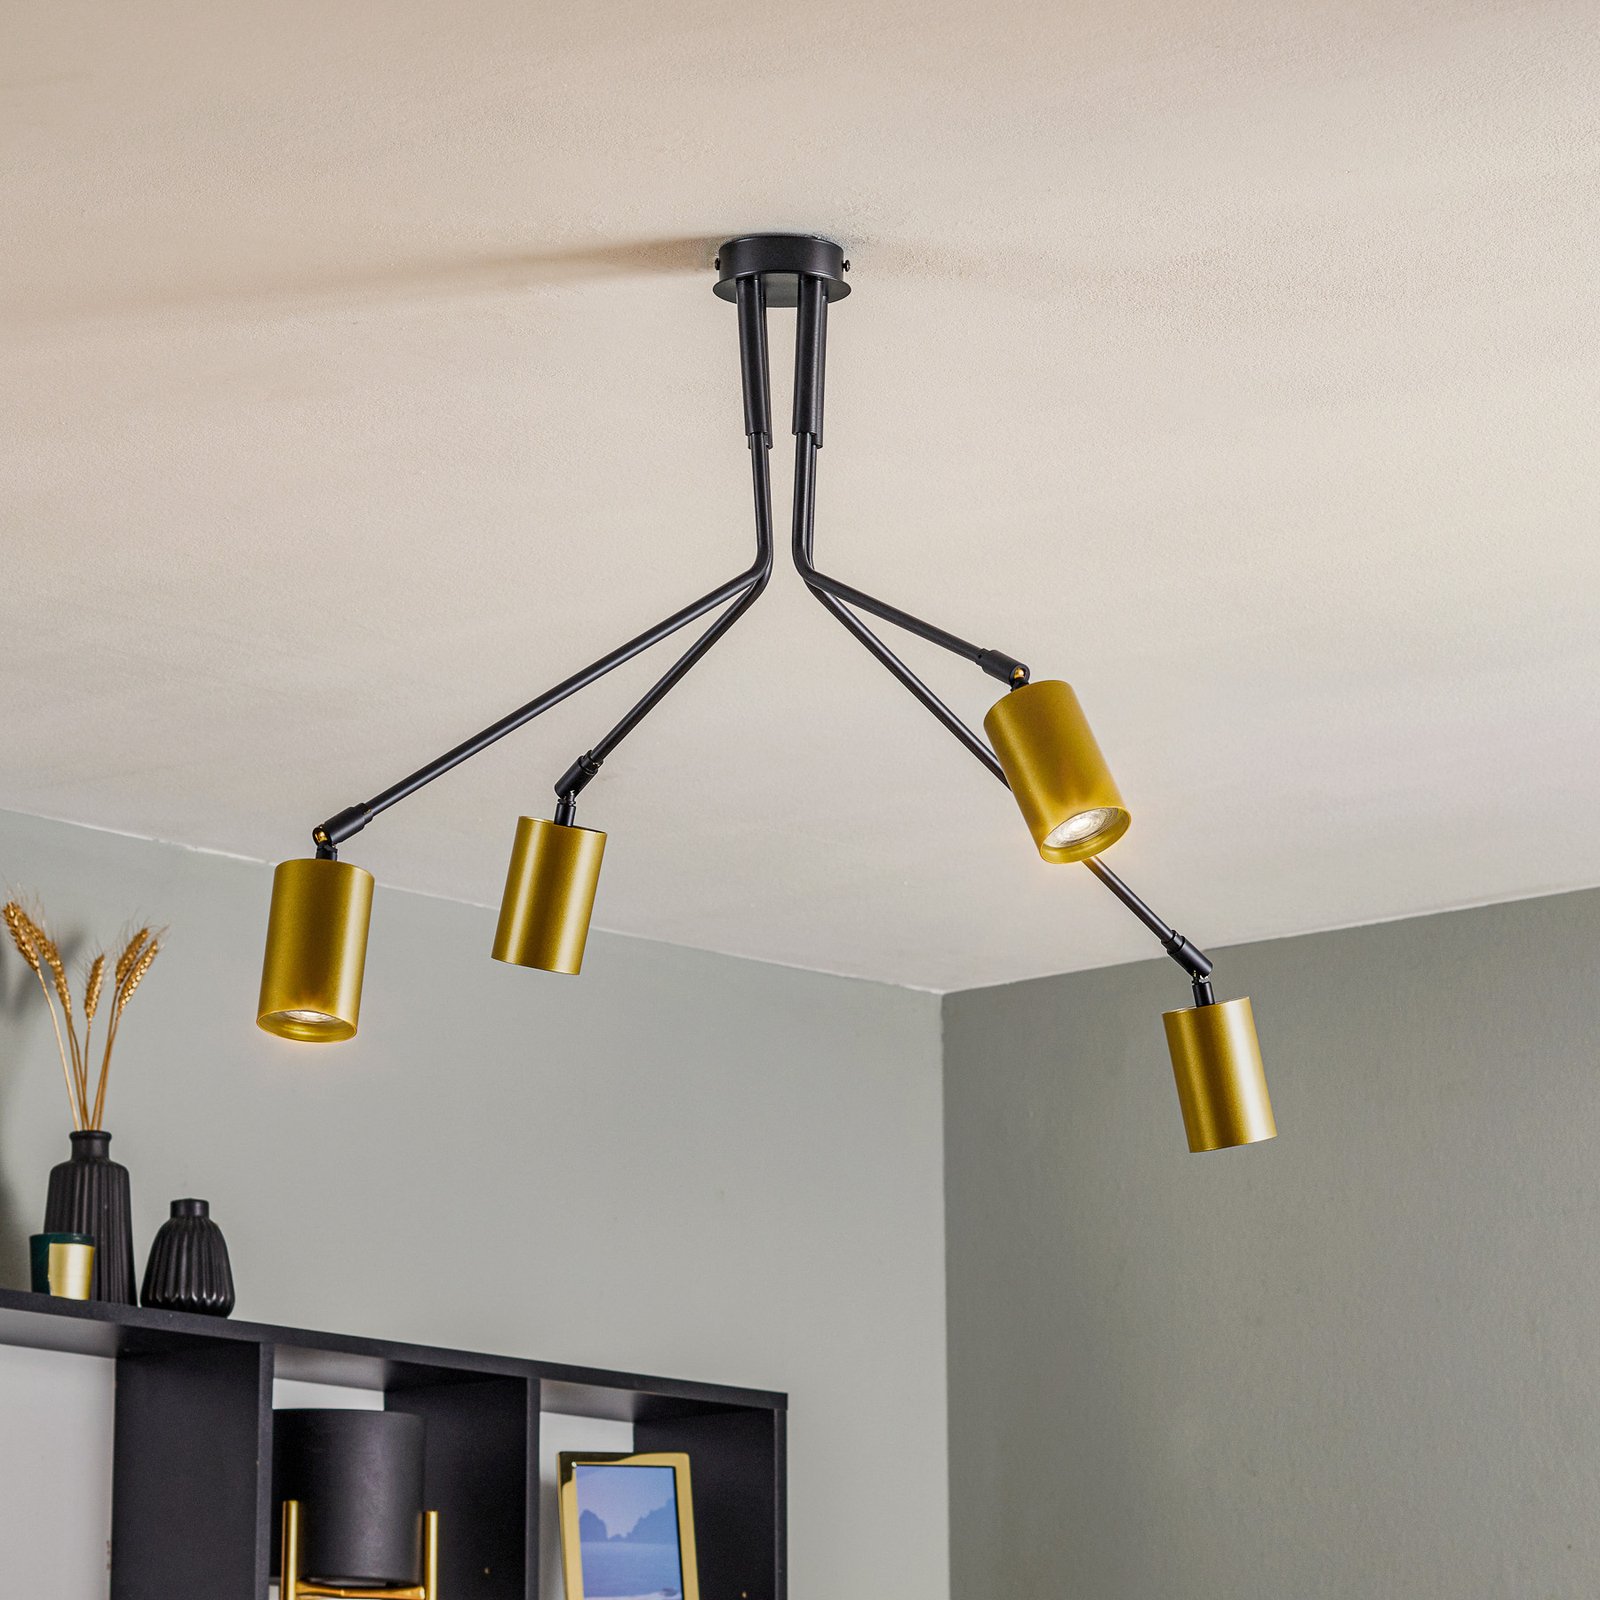 Verno 4 Black ceiling light in black and gold